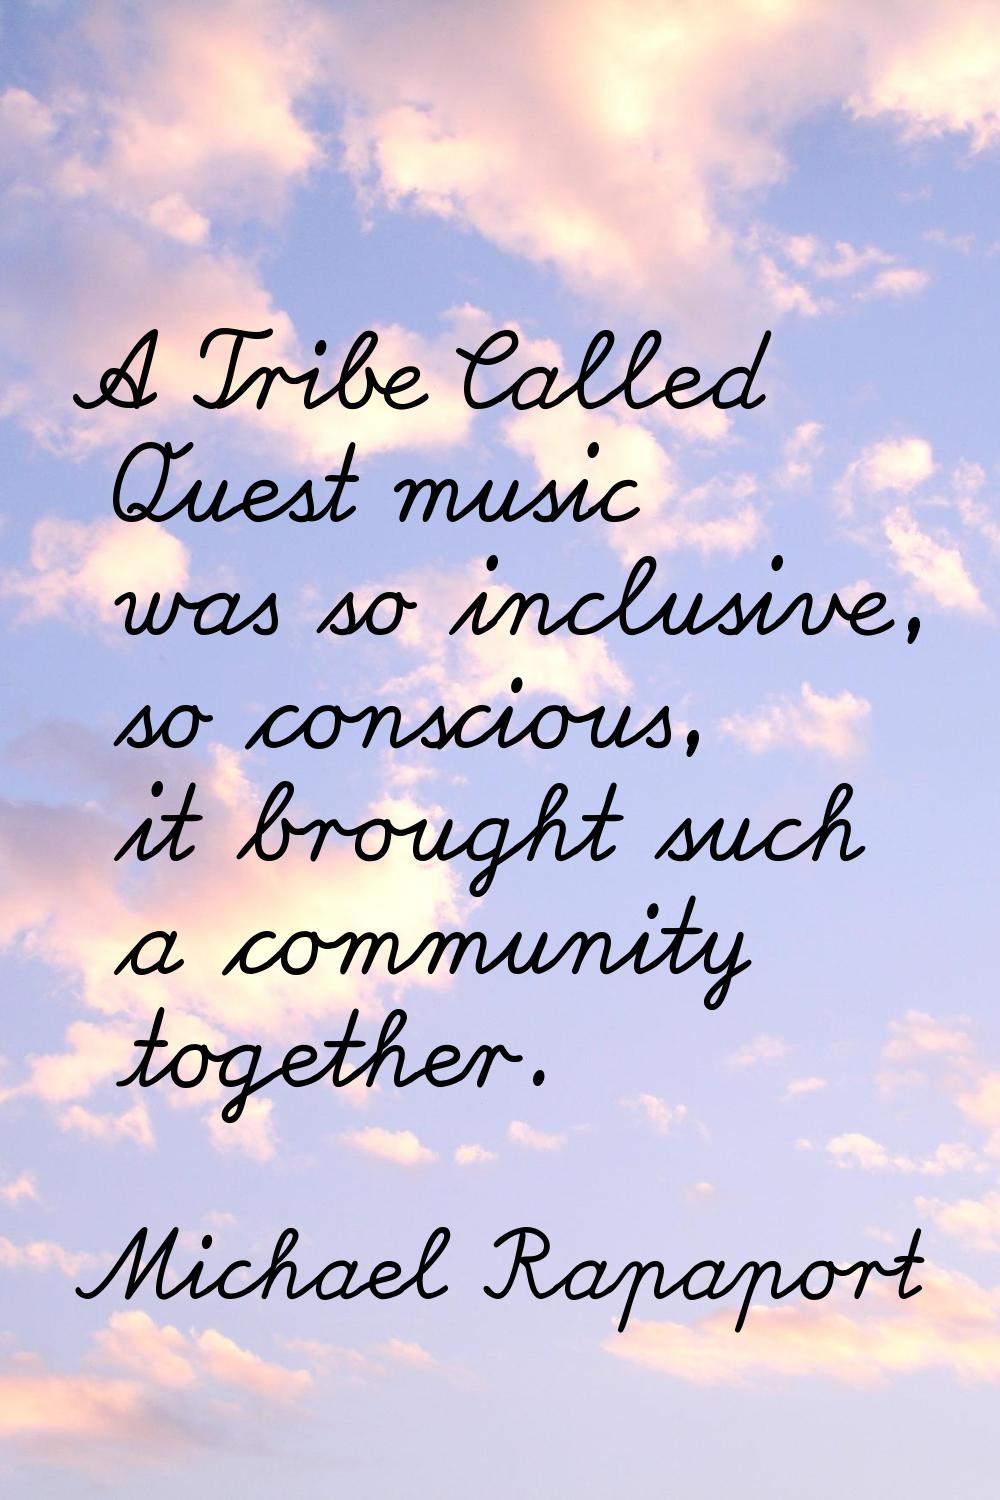 A Tribe Called Quest music was so inclusive, so conscious, it brought such a community together.